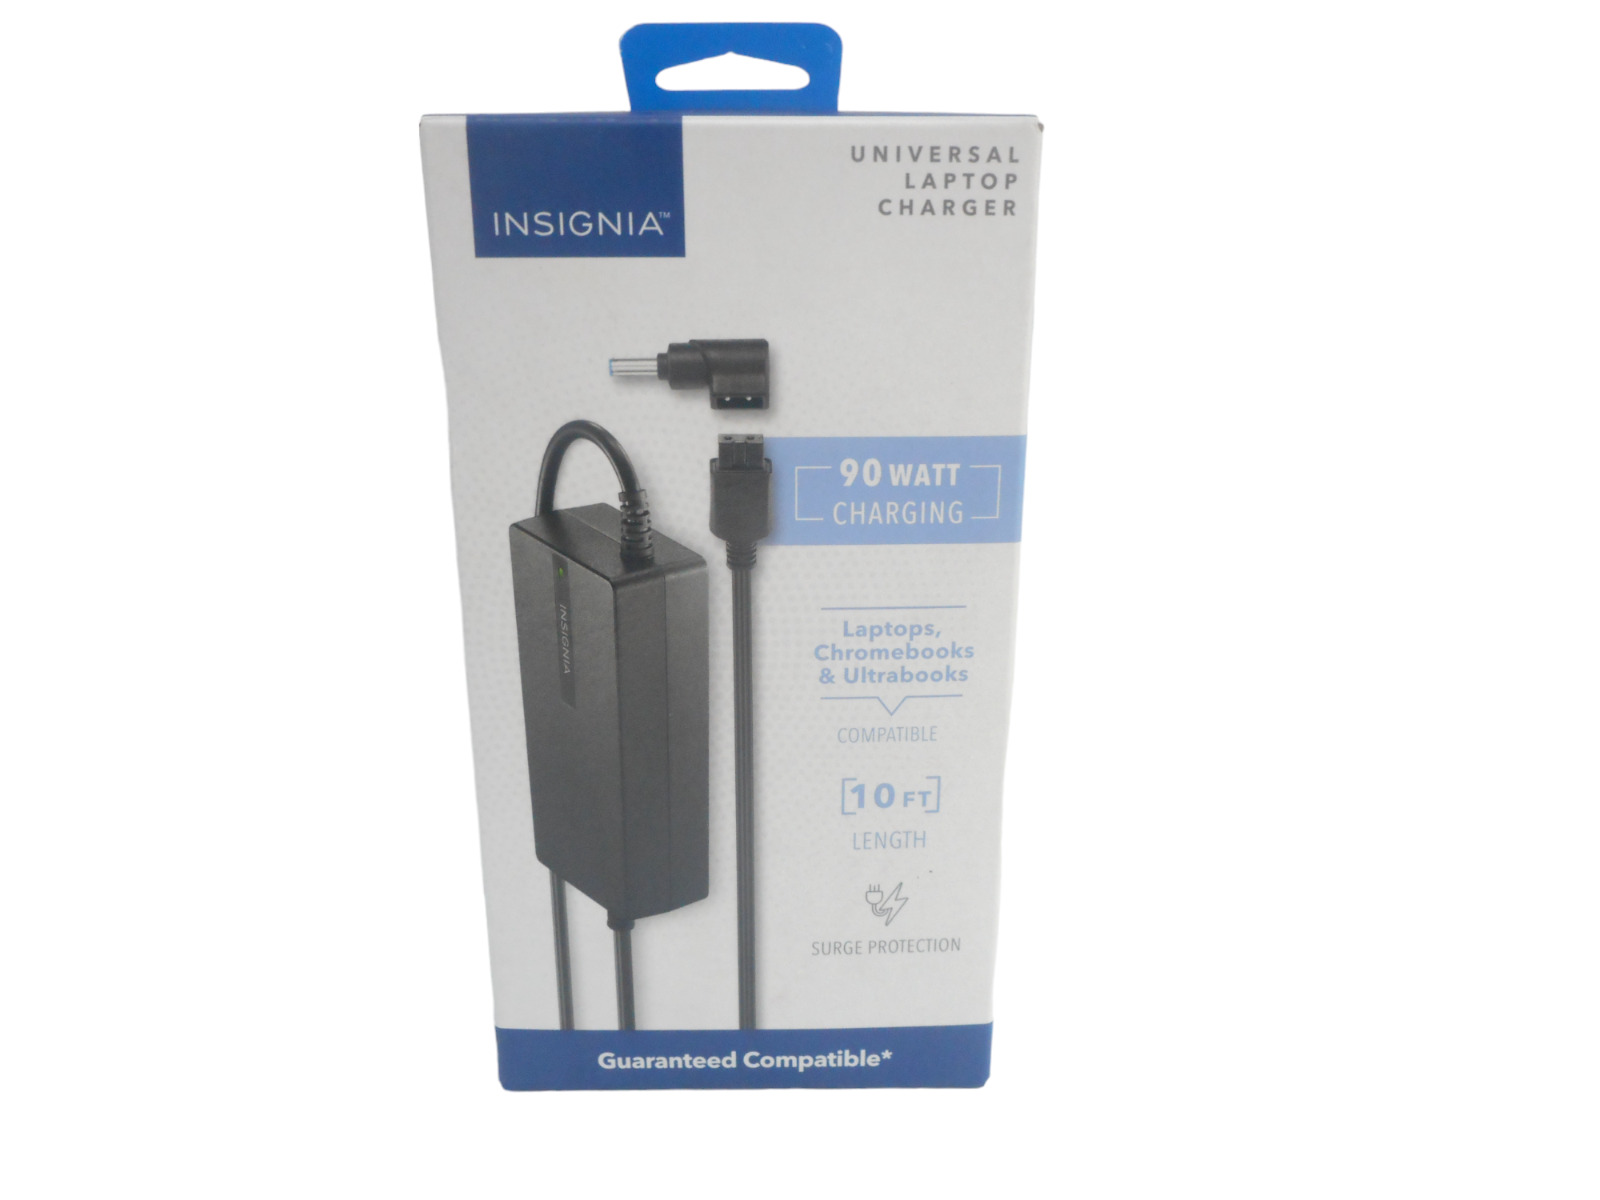 Insignia 90 W 10-Foot Universal Laptop Charger w/ Surge Protection NS-PWLC591 NE